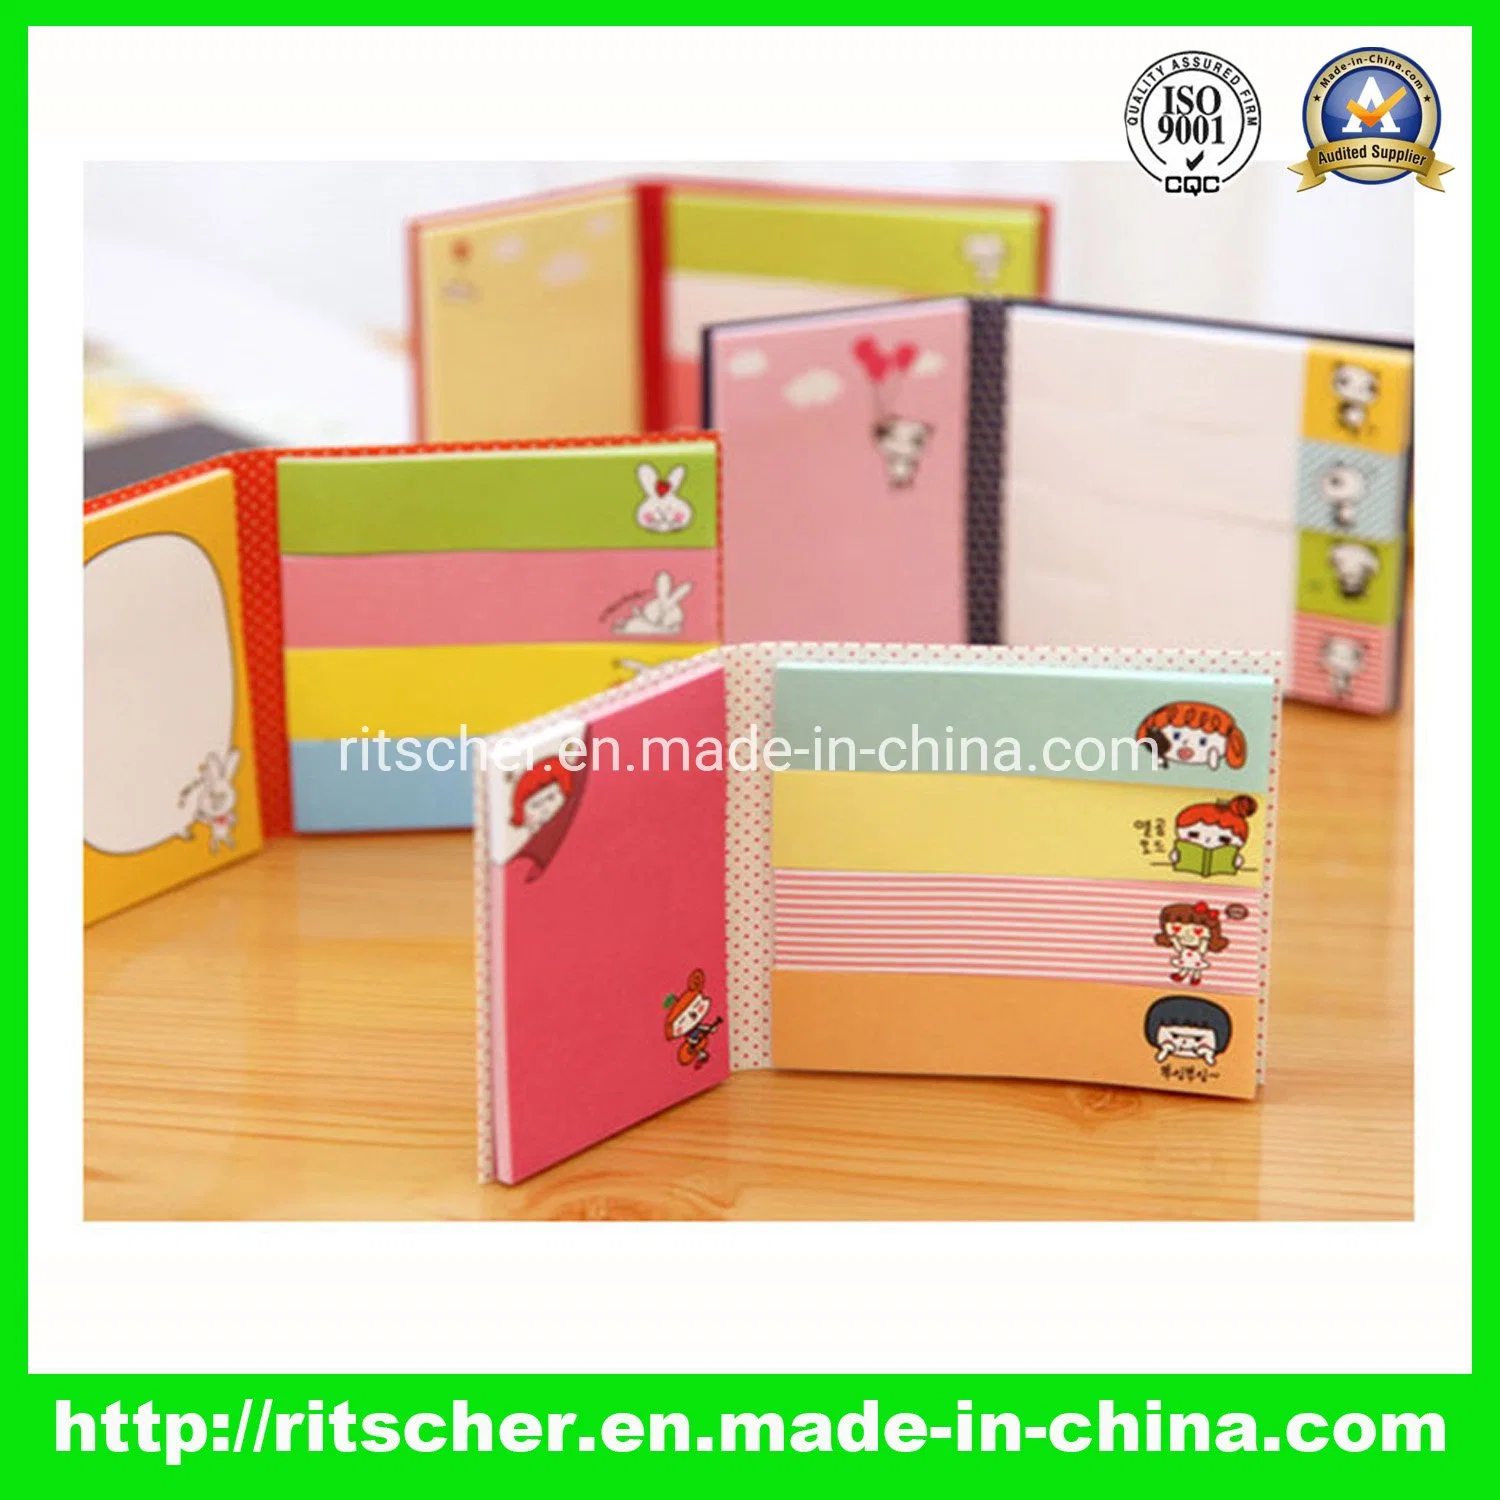 High Quality Book of Office/School Supply Certificate